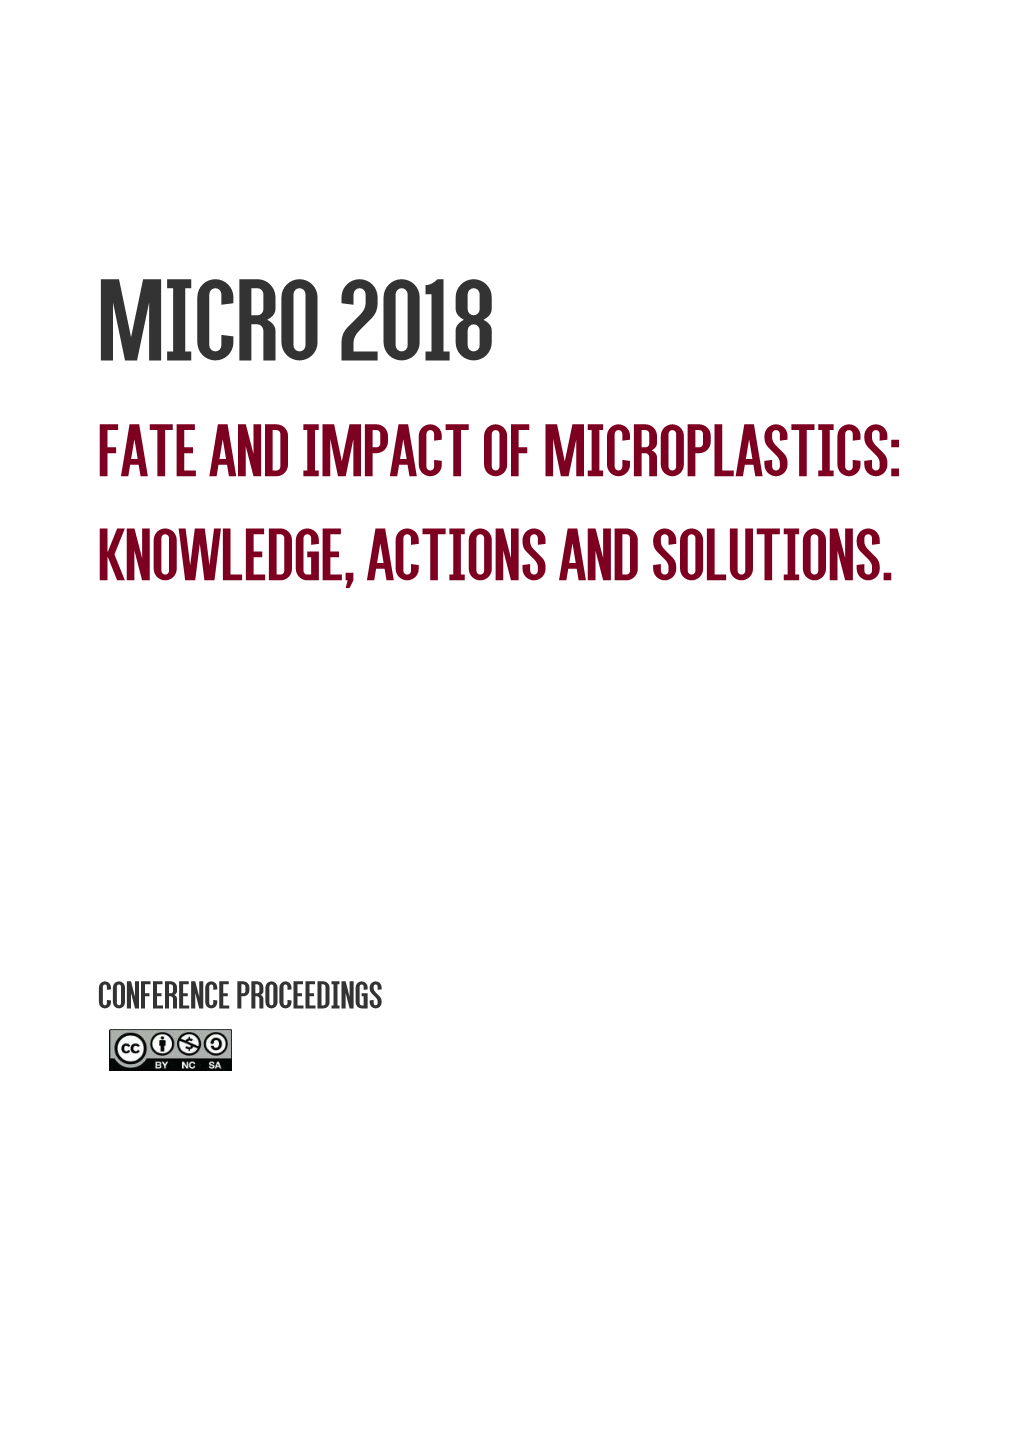 Fate and Impact of Microplastics: Knowledge, Actions and Solutions